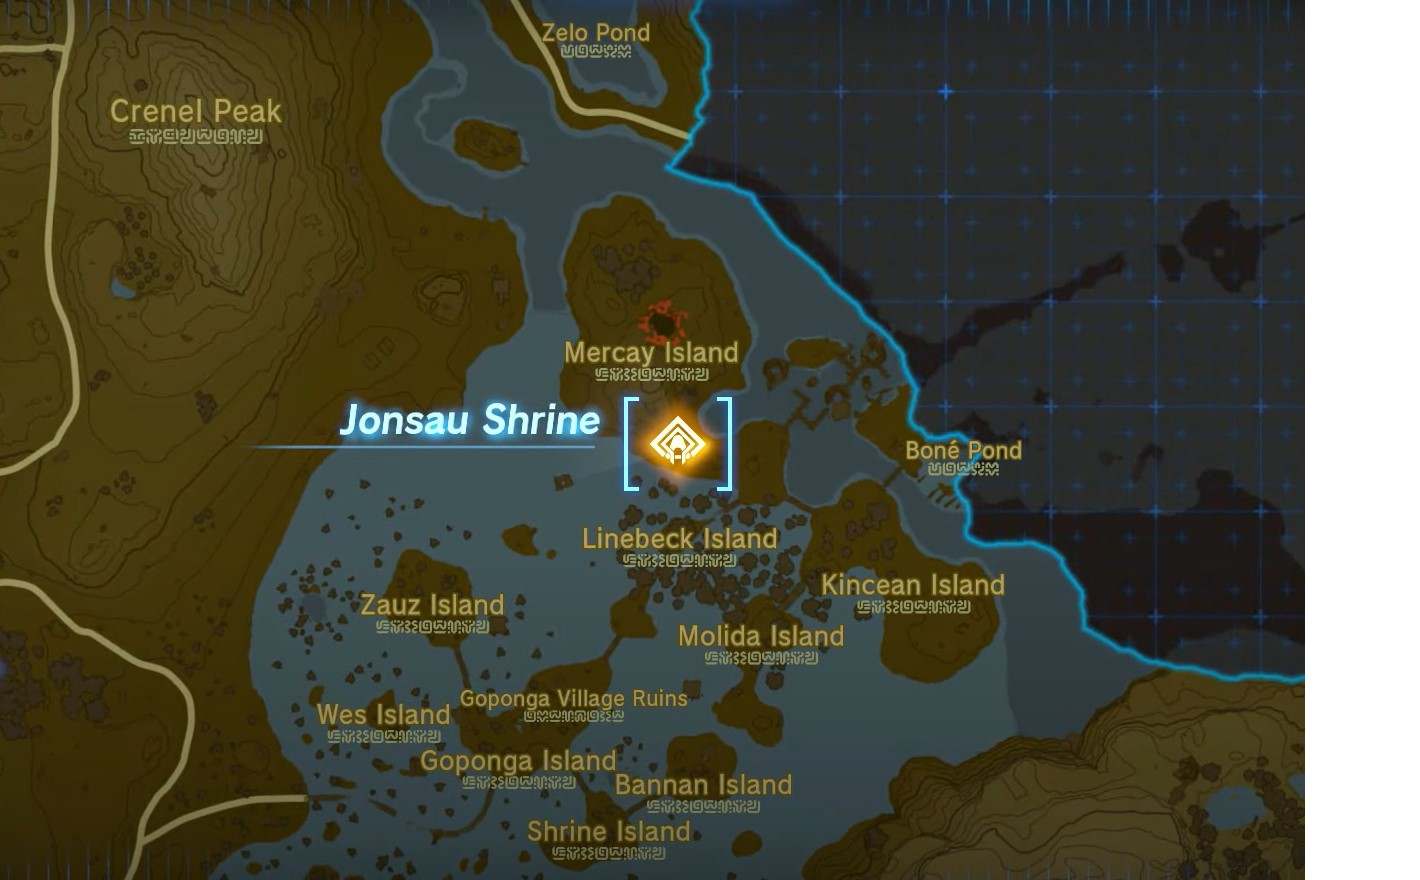 How to solve the Jonsau Shrine puzzle in Zelda map